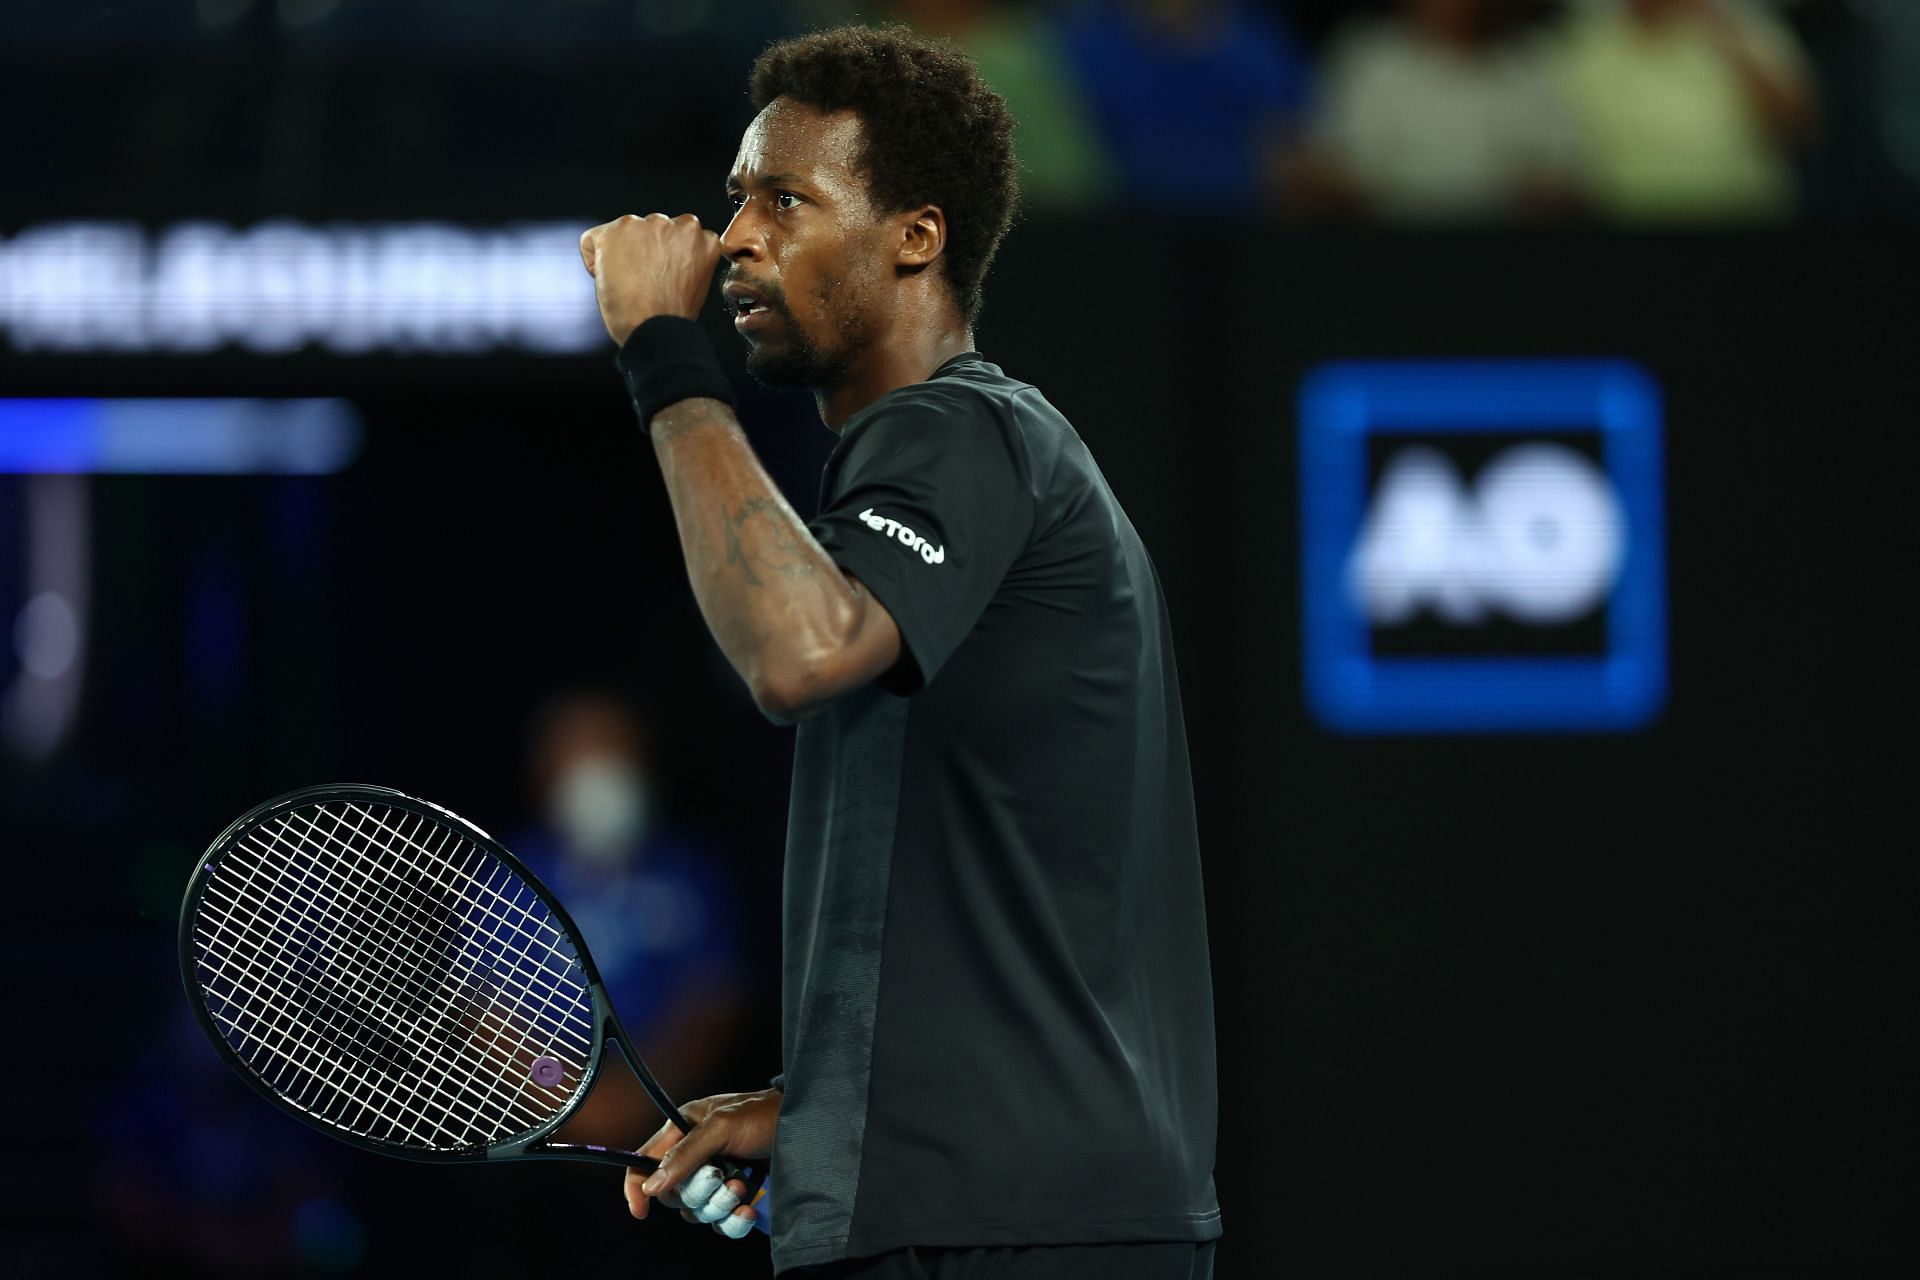 French tennis star Gael Monfils also mentioned that he admires Lewis Hamilton&#039;s attitude